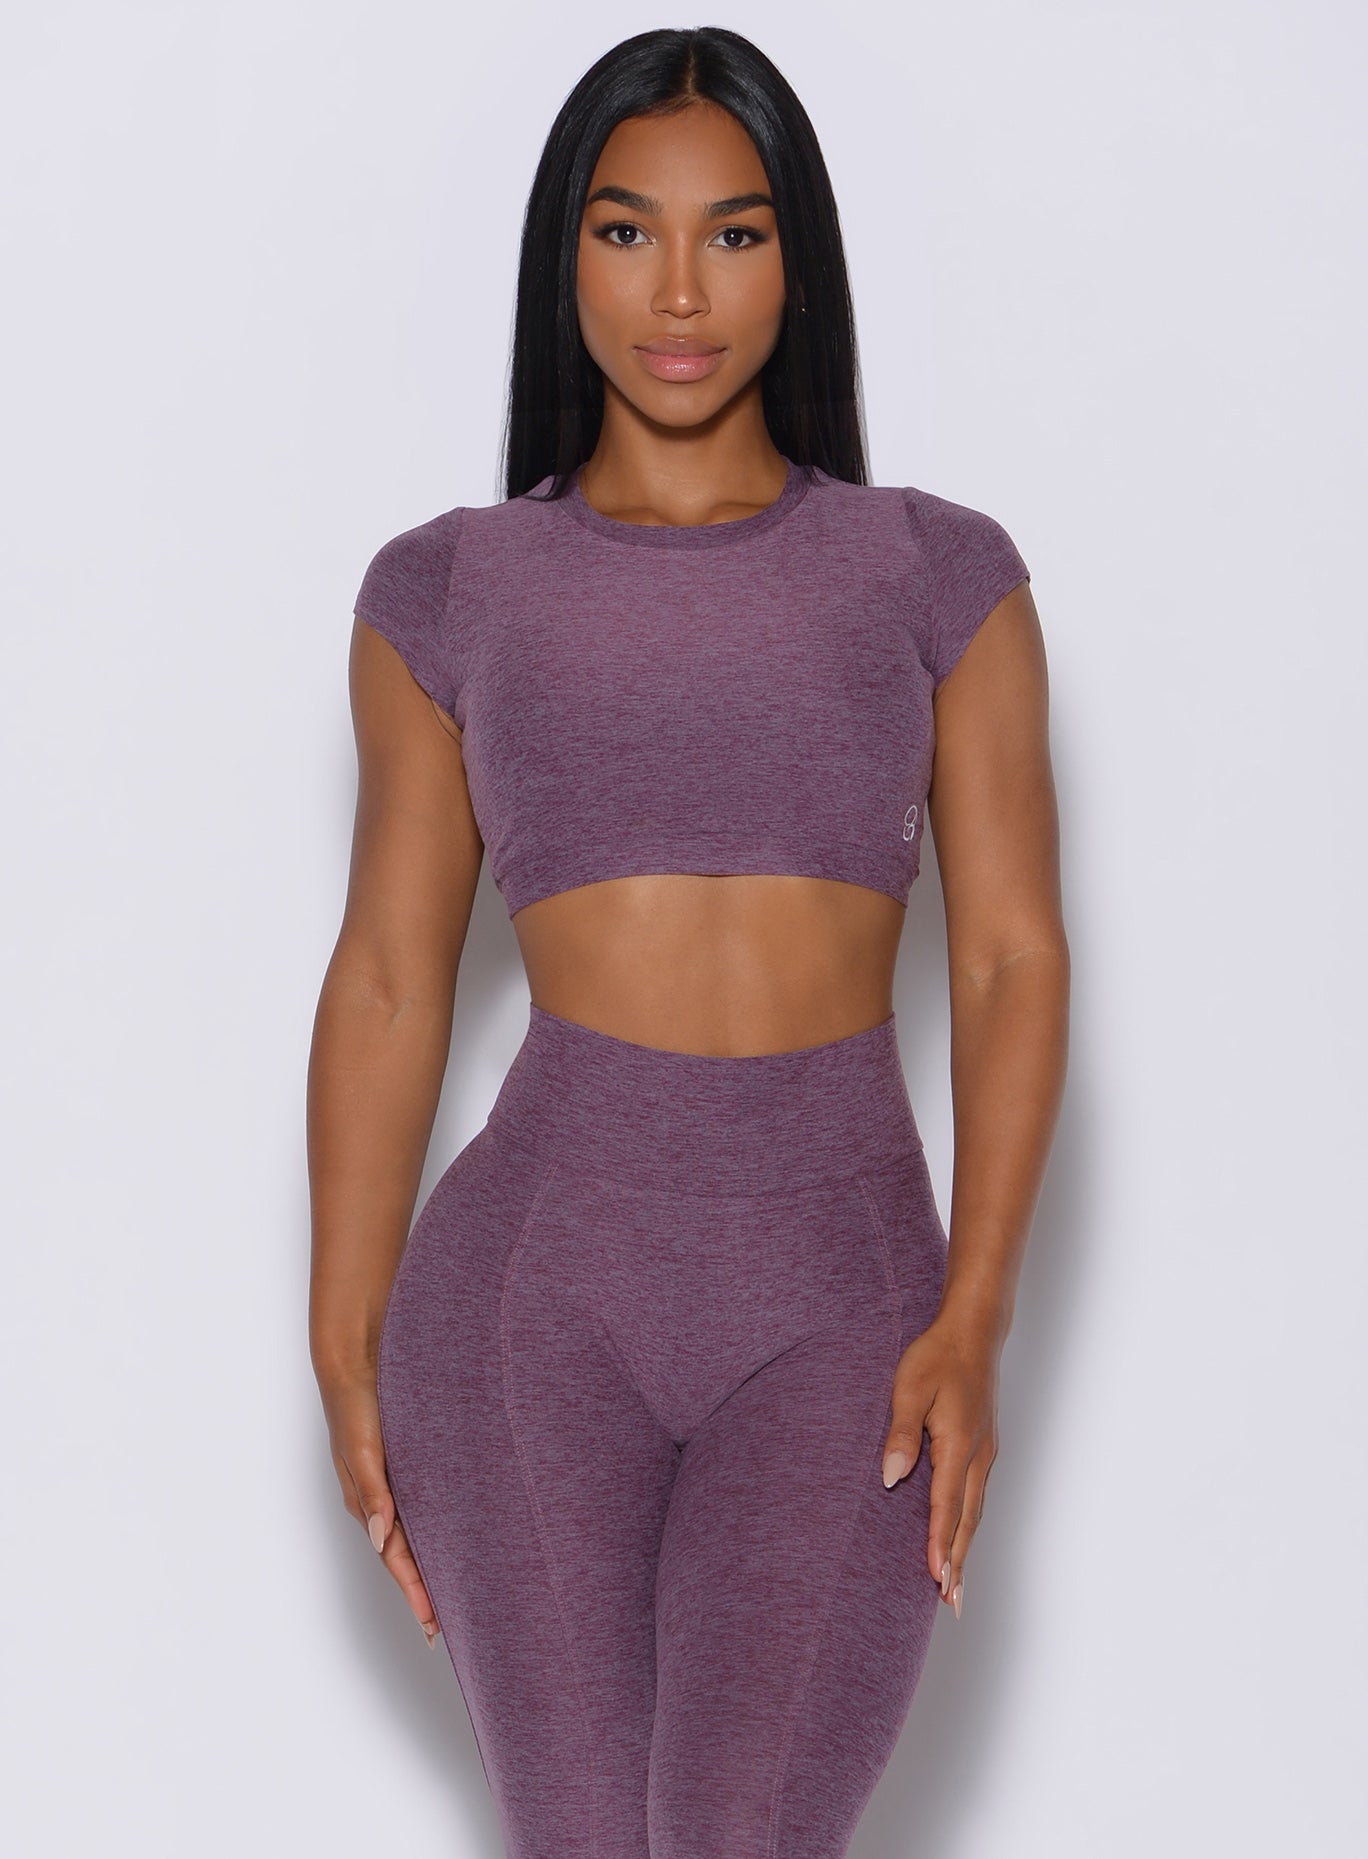 Front profile view of a model in our open back tee in Regal Purple color and a matching high waist leggings